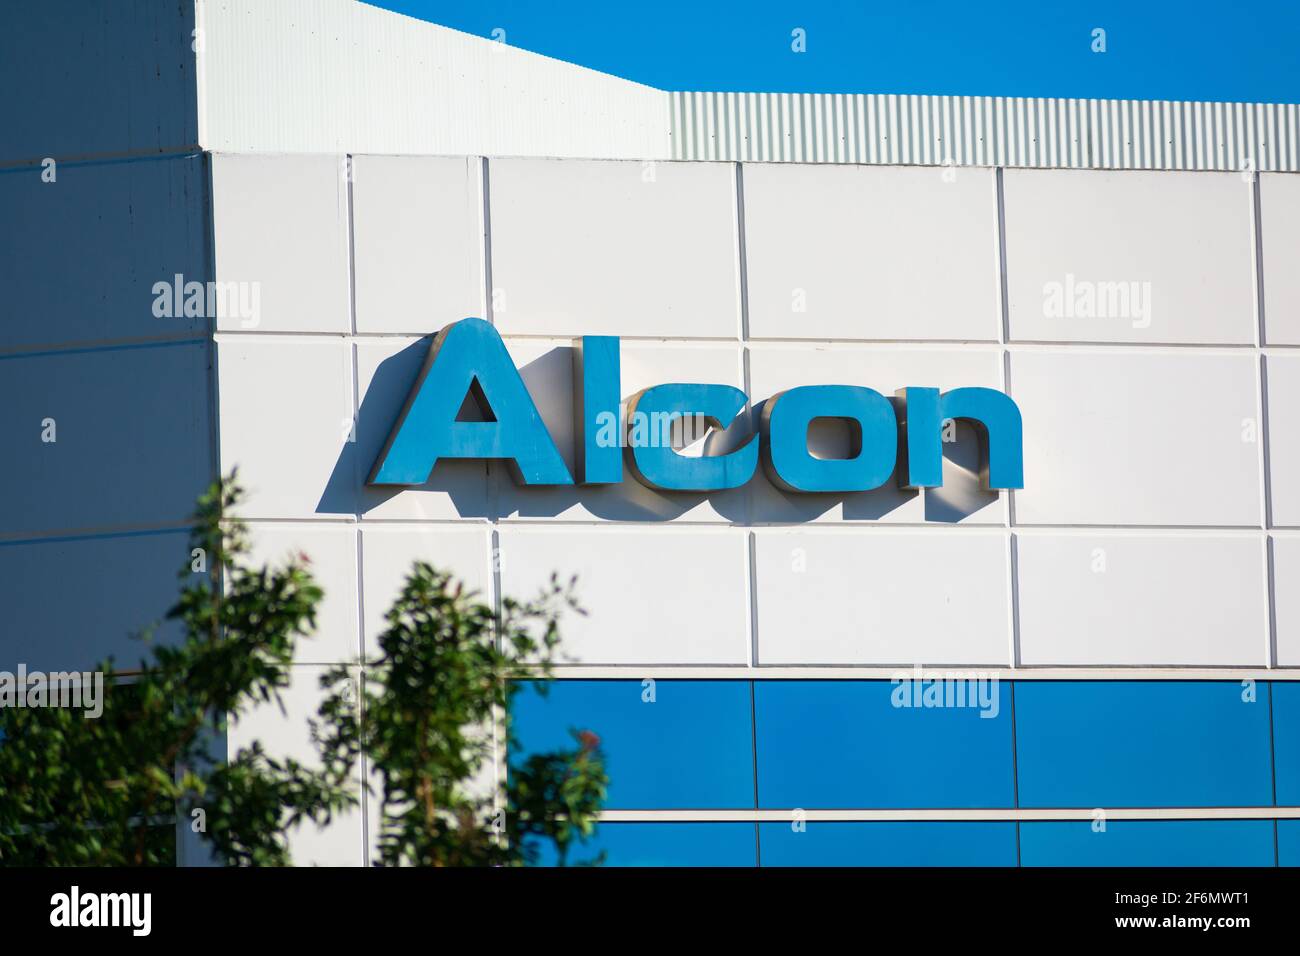 Alcon laboratories san diego ca any entry level jobs at adventist health system